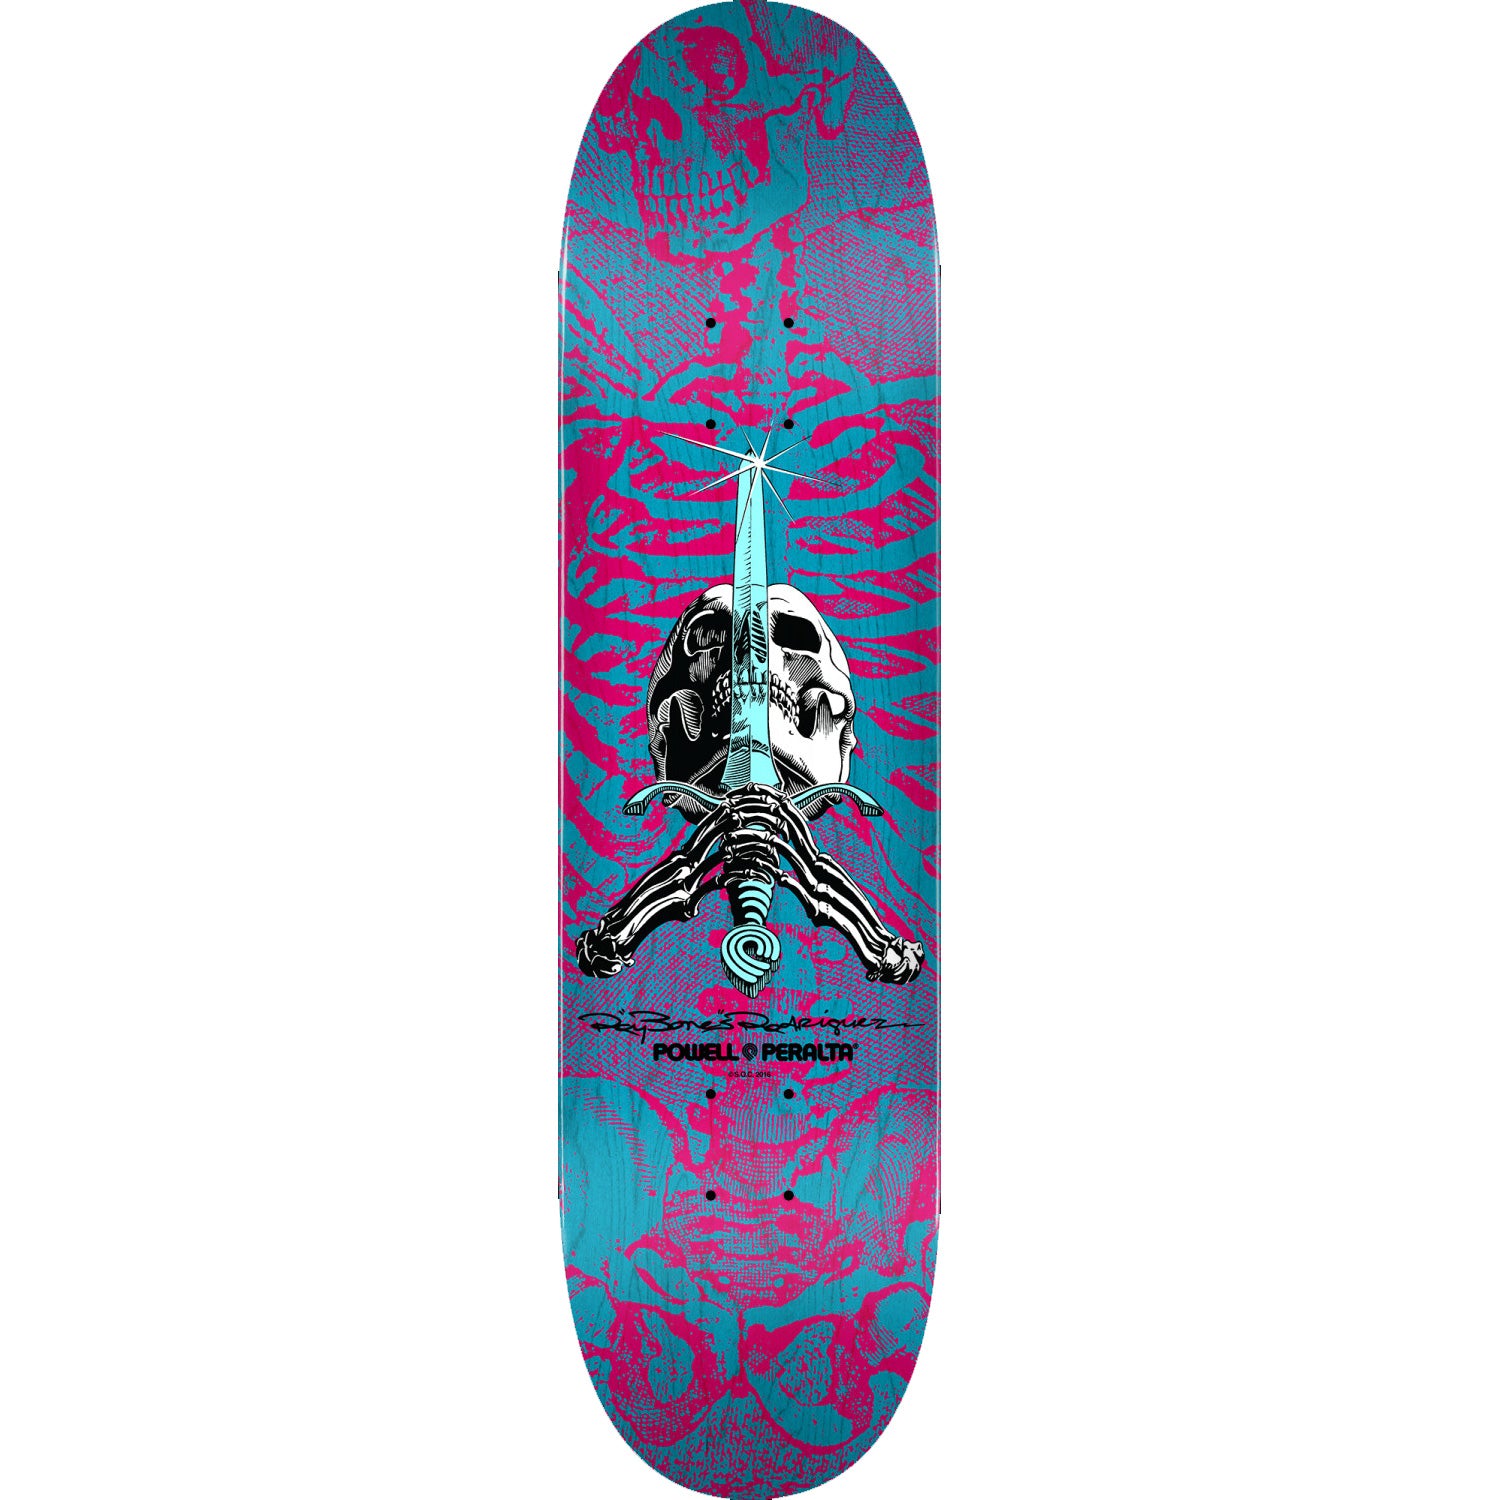 POWELL-PERALTA DECK - SKULL AND SWORD PINK BLUE (8.75") - The Drive Skateshop